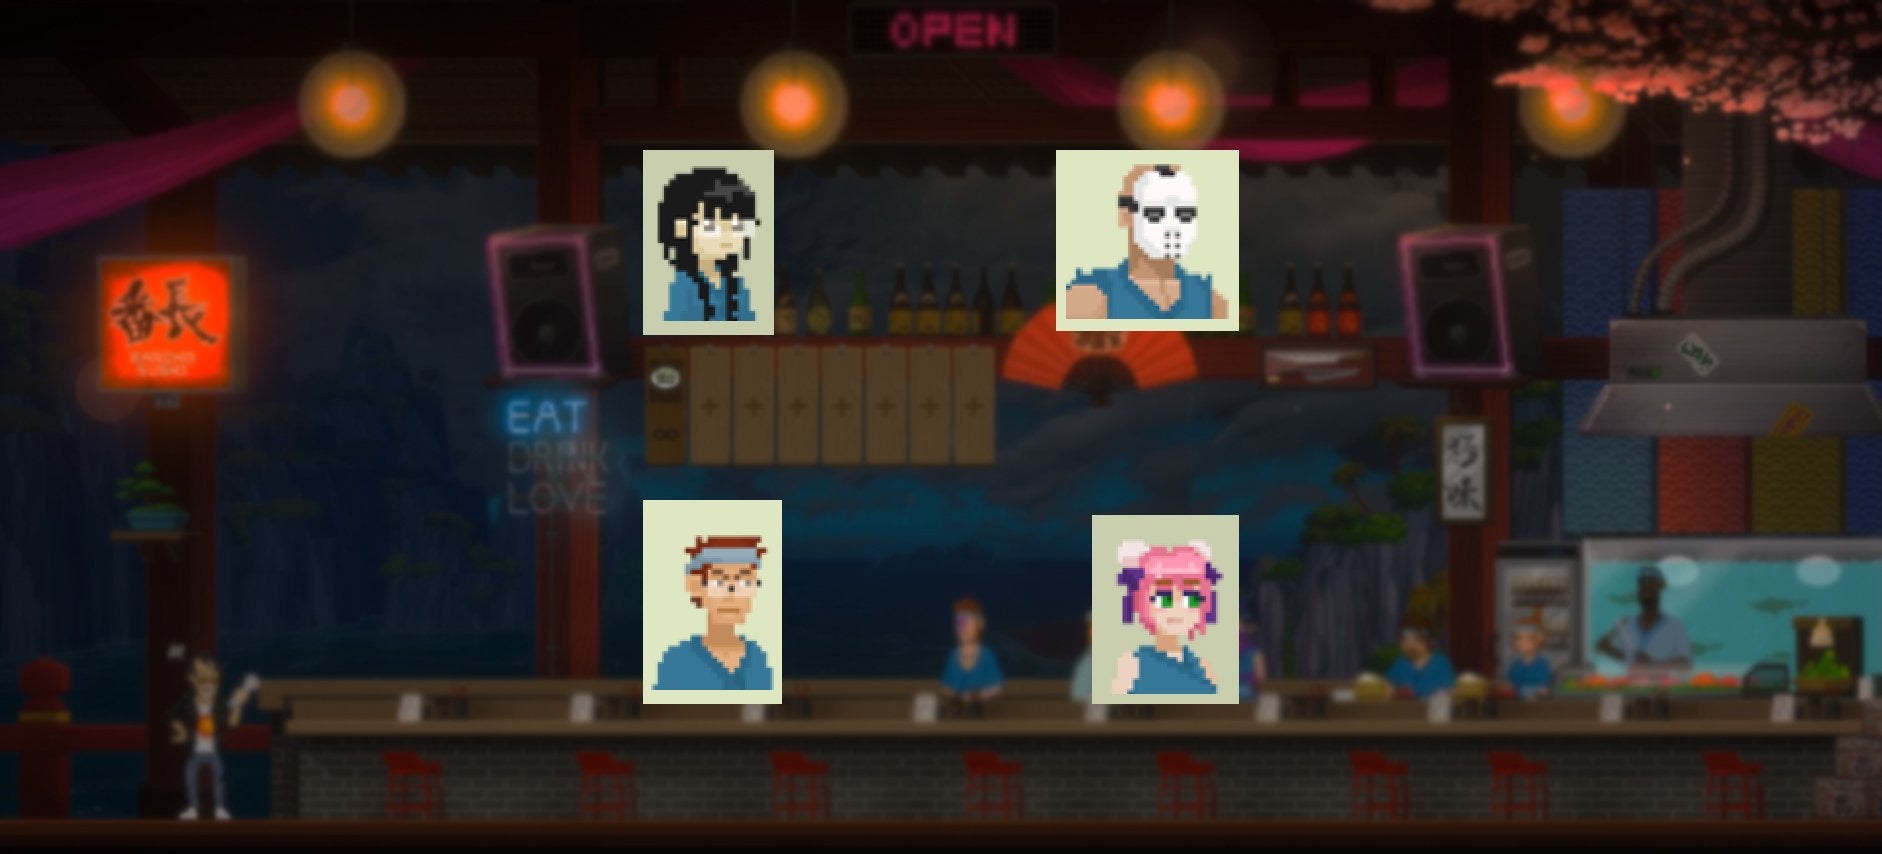 The portraits of four staff members in clockwise order: James, Yone, Charlie, and Maki. These staff members are in front of Bancho Sushi Bar in Dave the Diver.